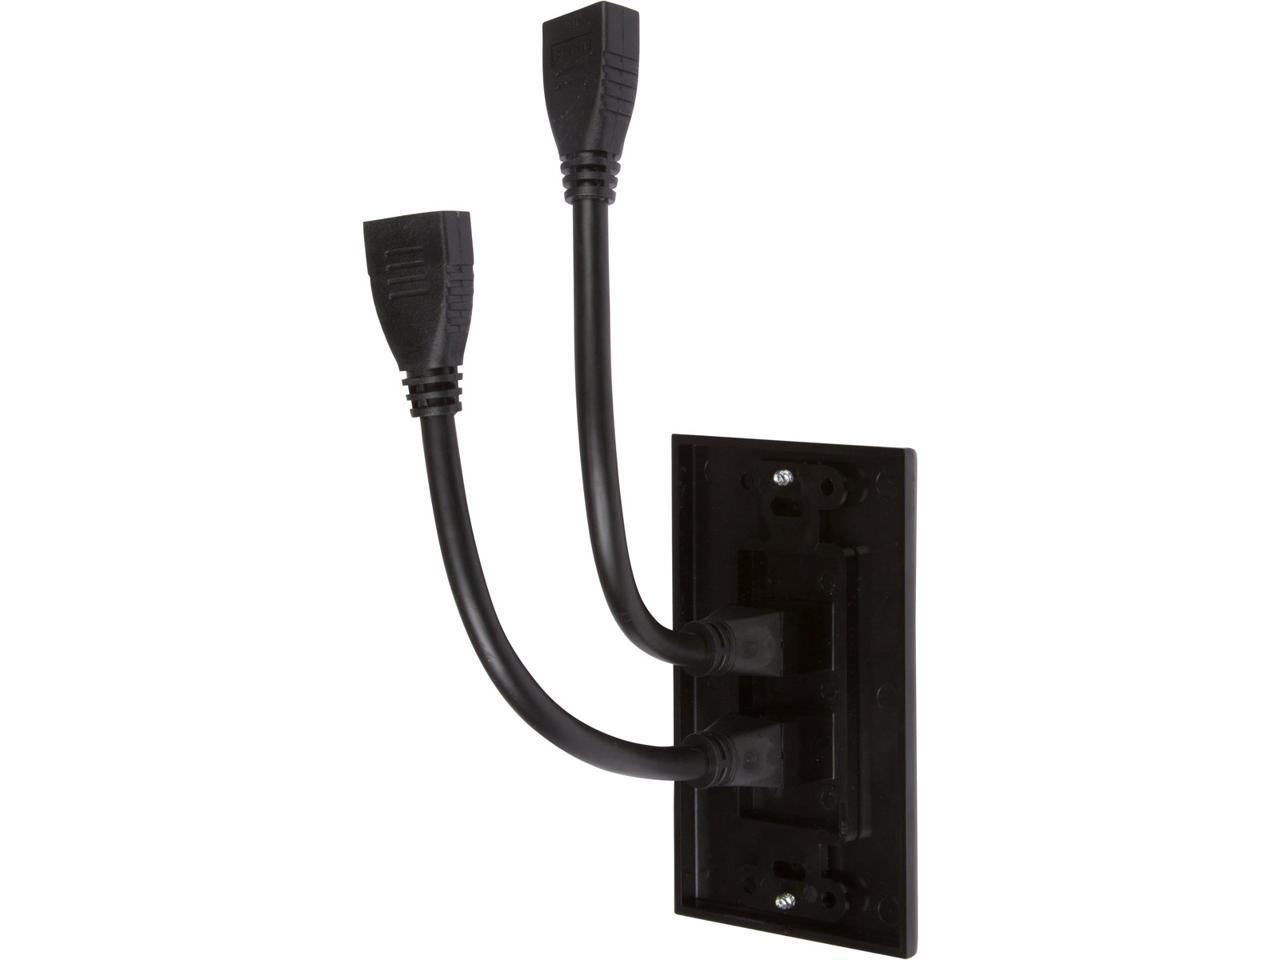 Buyer's Point HDMI Wall Plate[UL Listed] 2 Port Insert with 6-Inch Built-in Flexible Hi-Speed HDMI Cable with Ethernet Decora Style 2-Piece Pigtail Jack/Plug for Dual Outlet Port Pack of 1 Black Kit - image 5 of 6